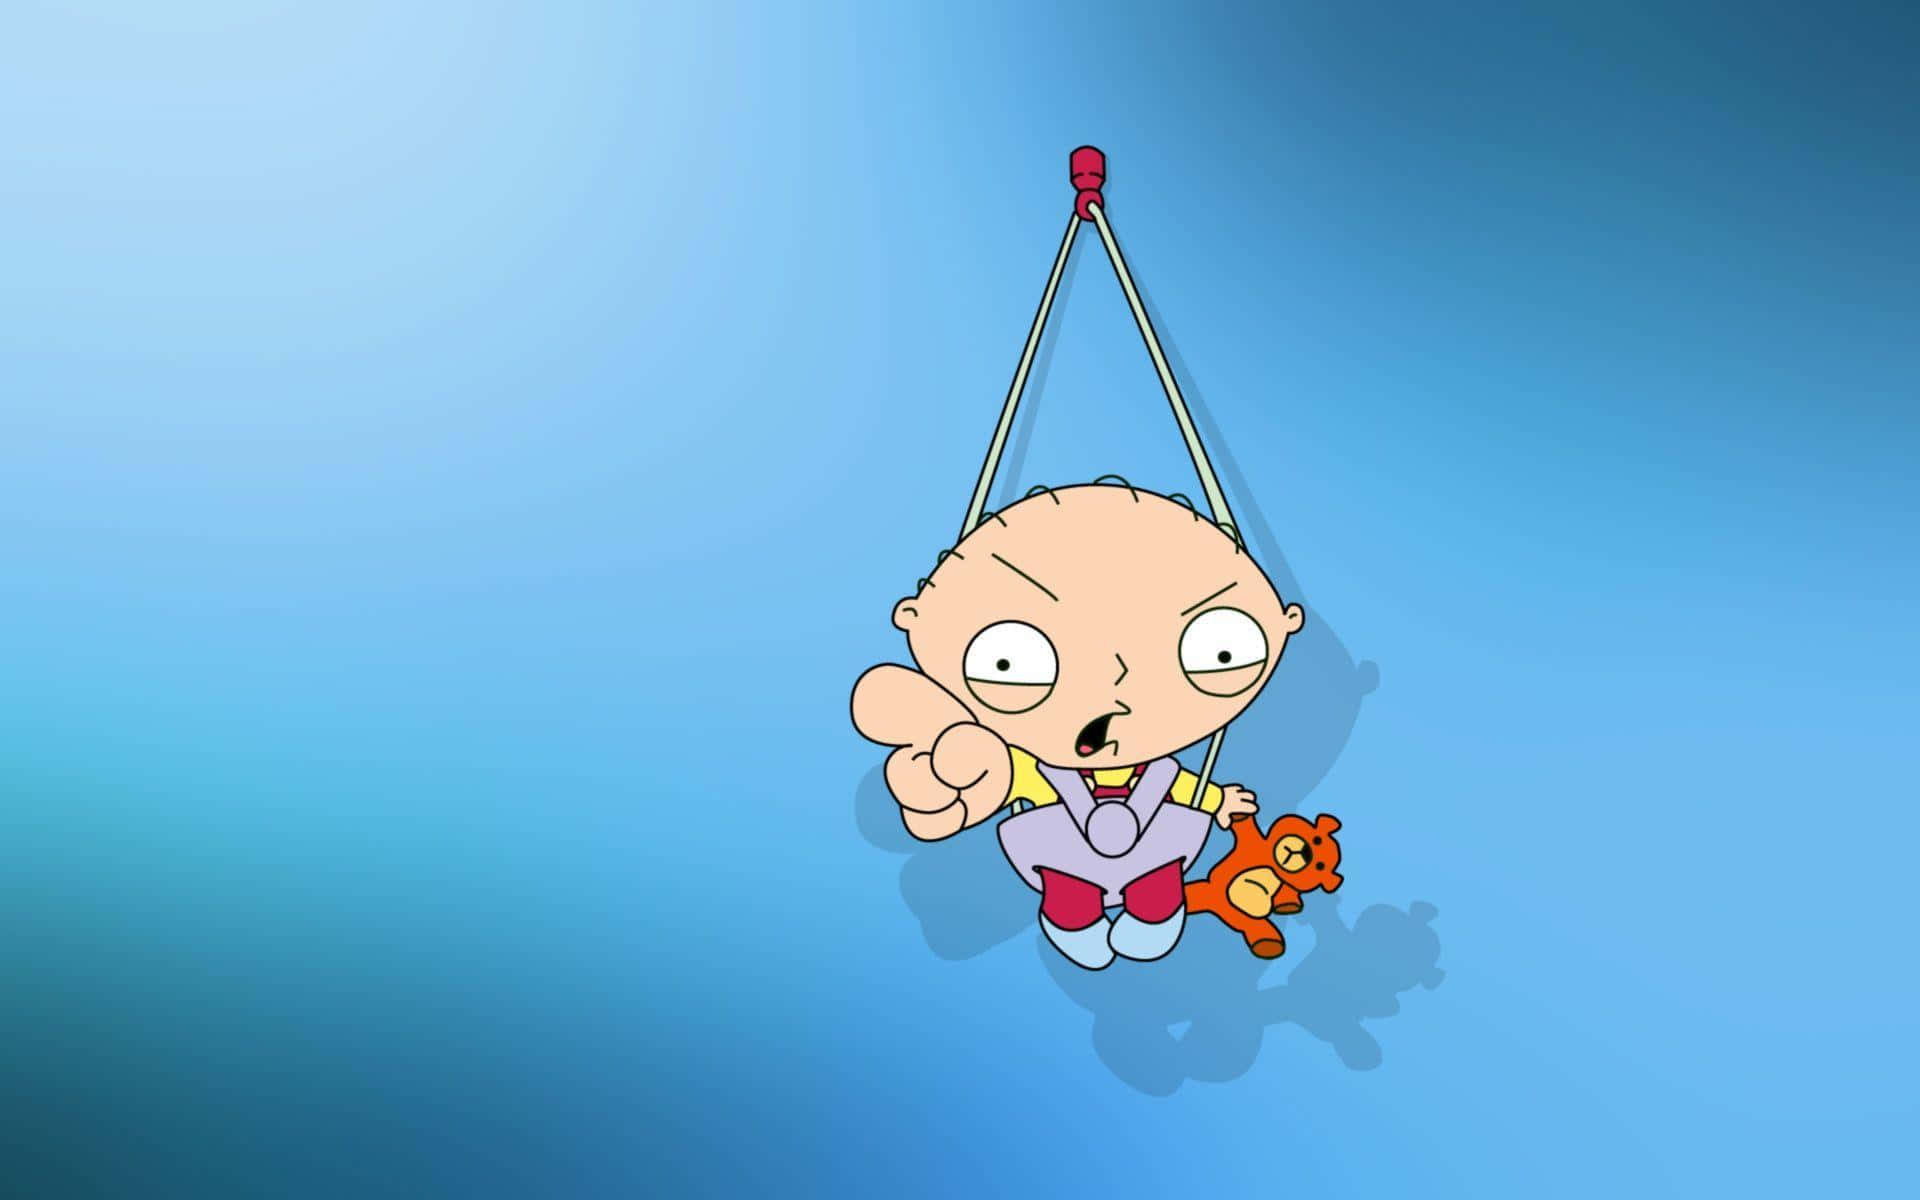 A Cartoon Character Hanging From A String